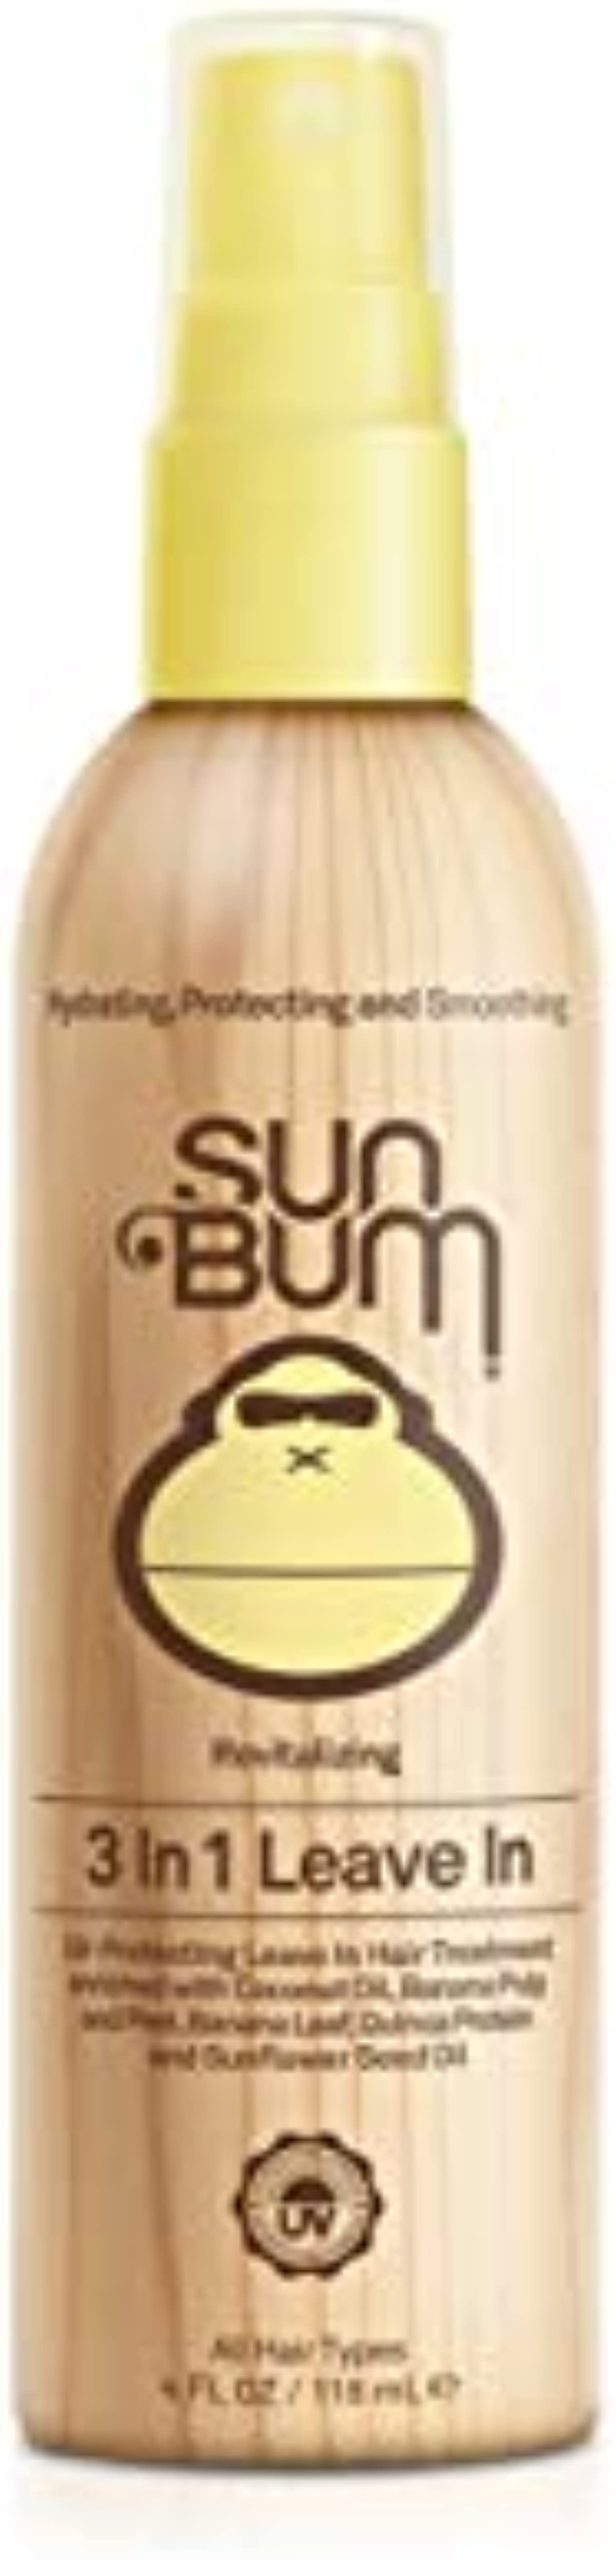 Sun Bum Revitalizing 3 in 1 Leave-In Conditioner Spray Detangler | Anti Frizz , Paraben and Gluten Free, Vegan, and Color Safe with UV Protection | 4 oz